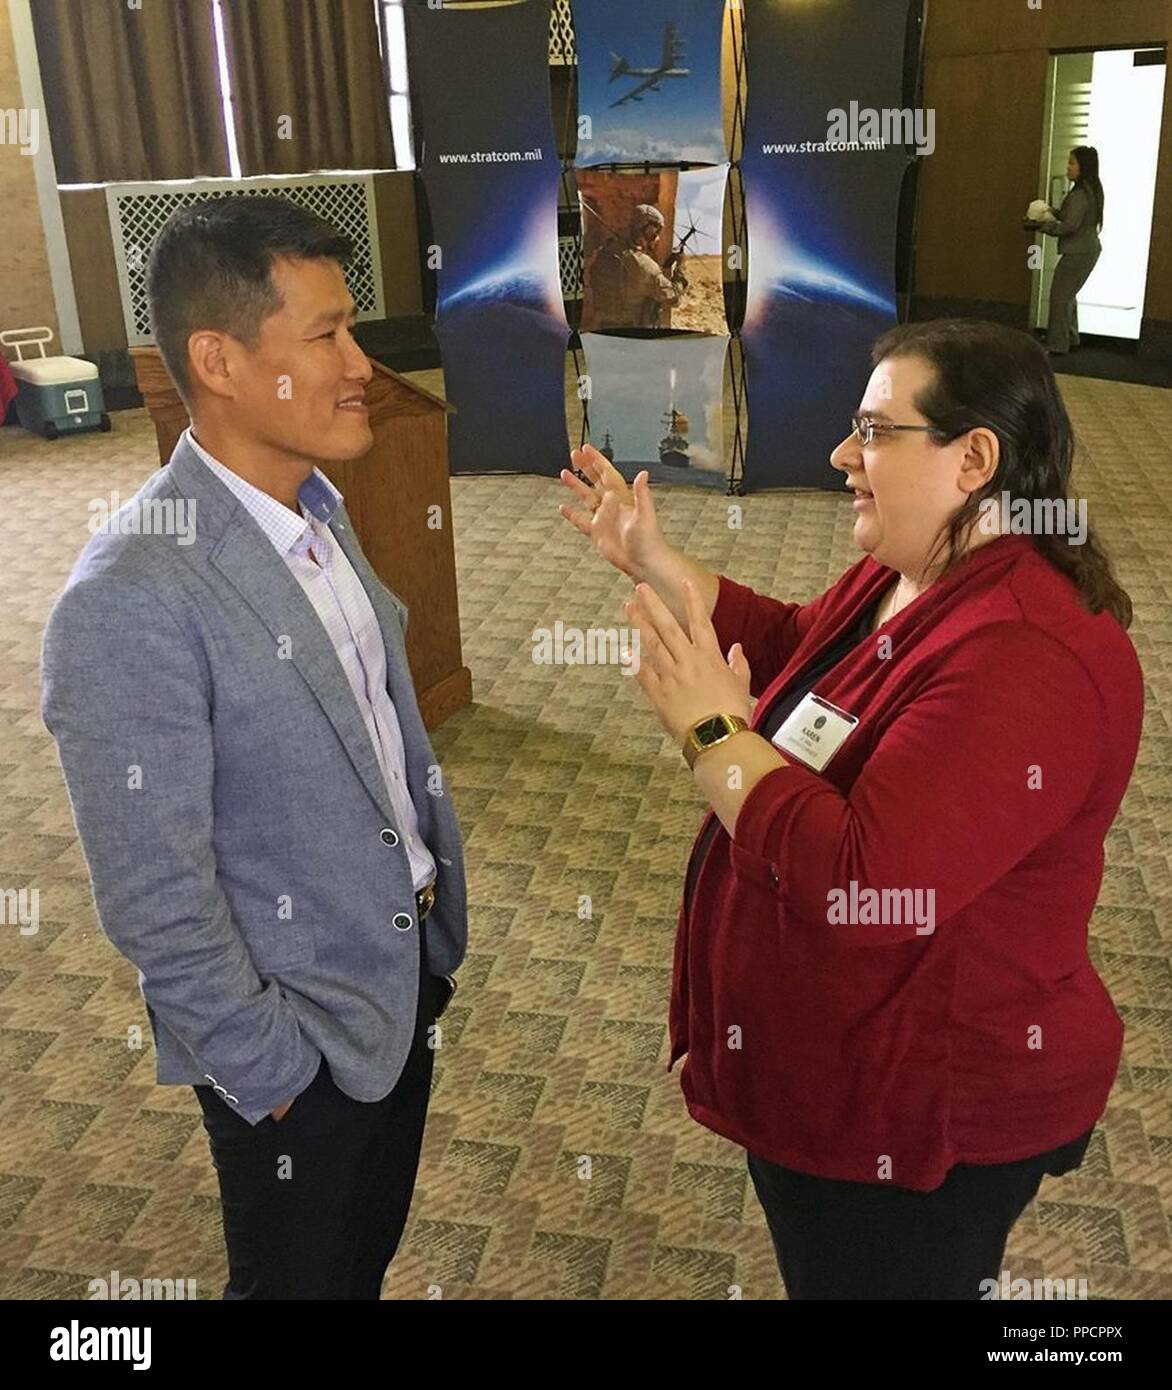 Dr. Karen Miller, U.S. Strategic Command Historian, speaks with Col. Jaehyung Jeong, Republic of Korea Liaison Officer, during a Senior Leader Offsite at the Durham Museum in Omaha, Neb., Aug. 23, 2018. Communication among senior leaders is critical to achieving objectives at USSTRATCOM. Stock Photo